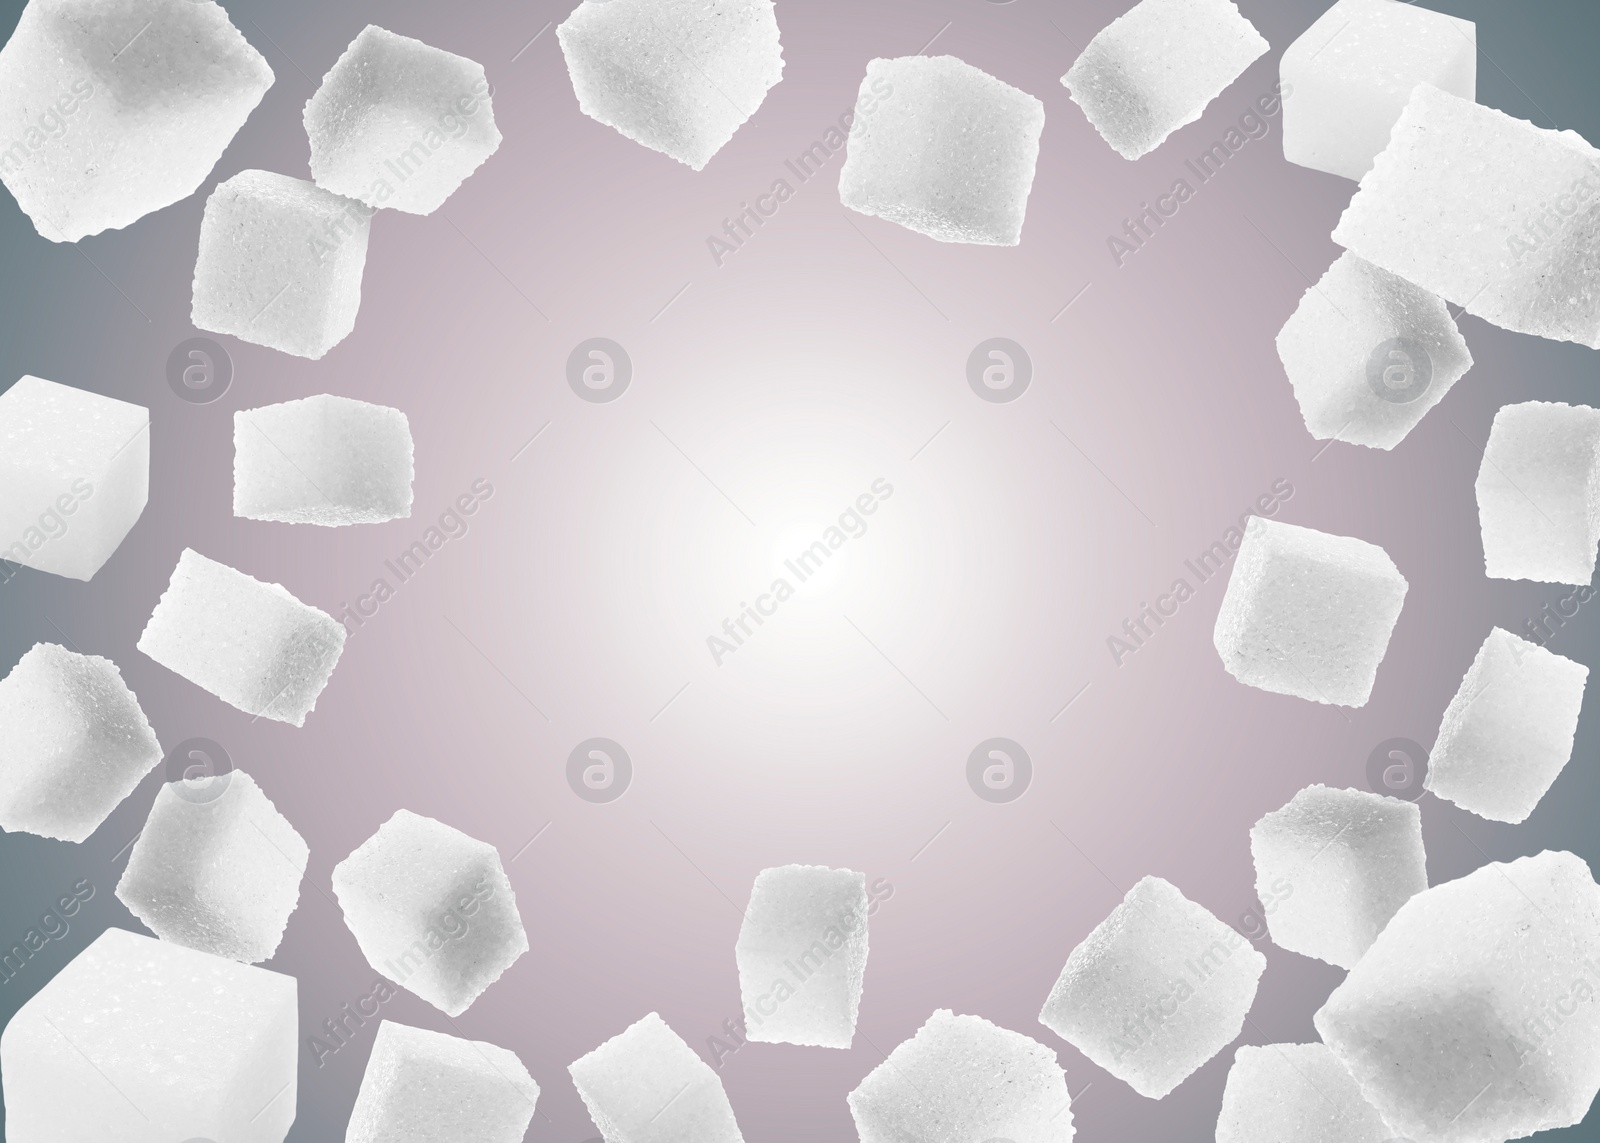 Image of Refined sugar cubes in air on grey gradient background. Space for text